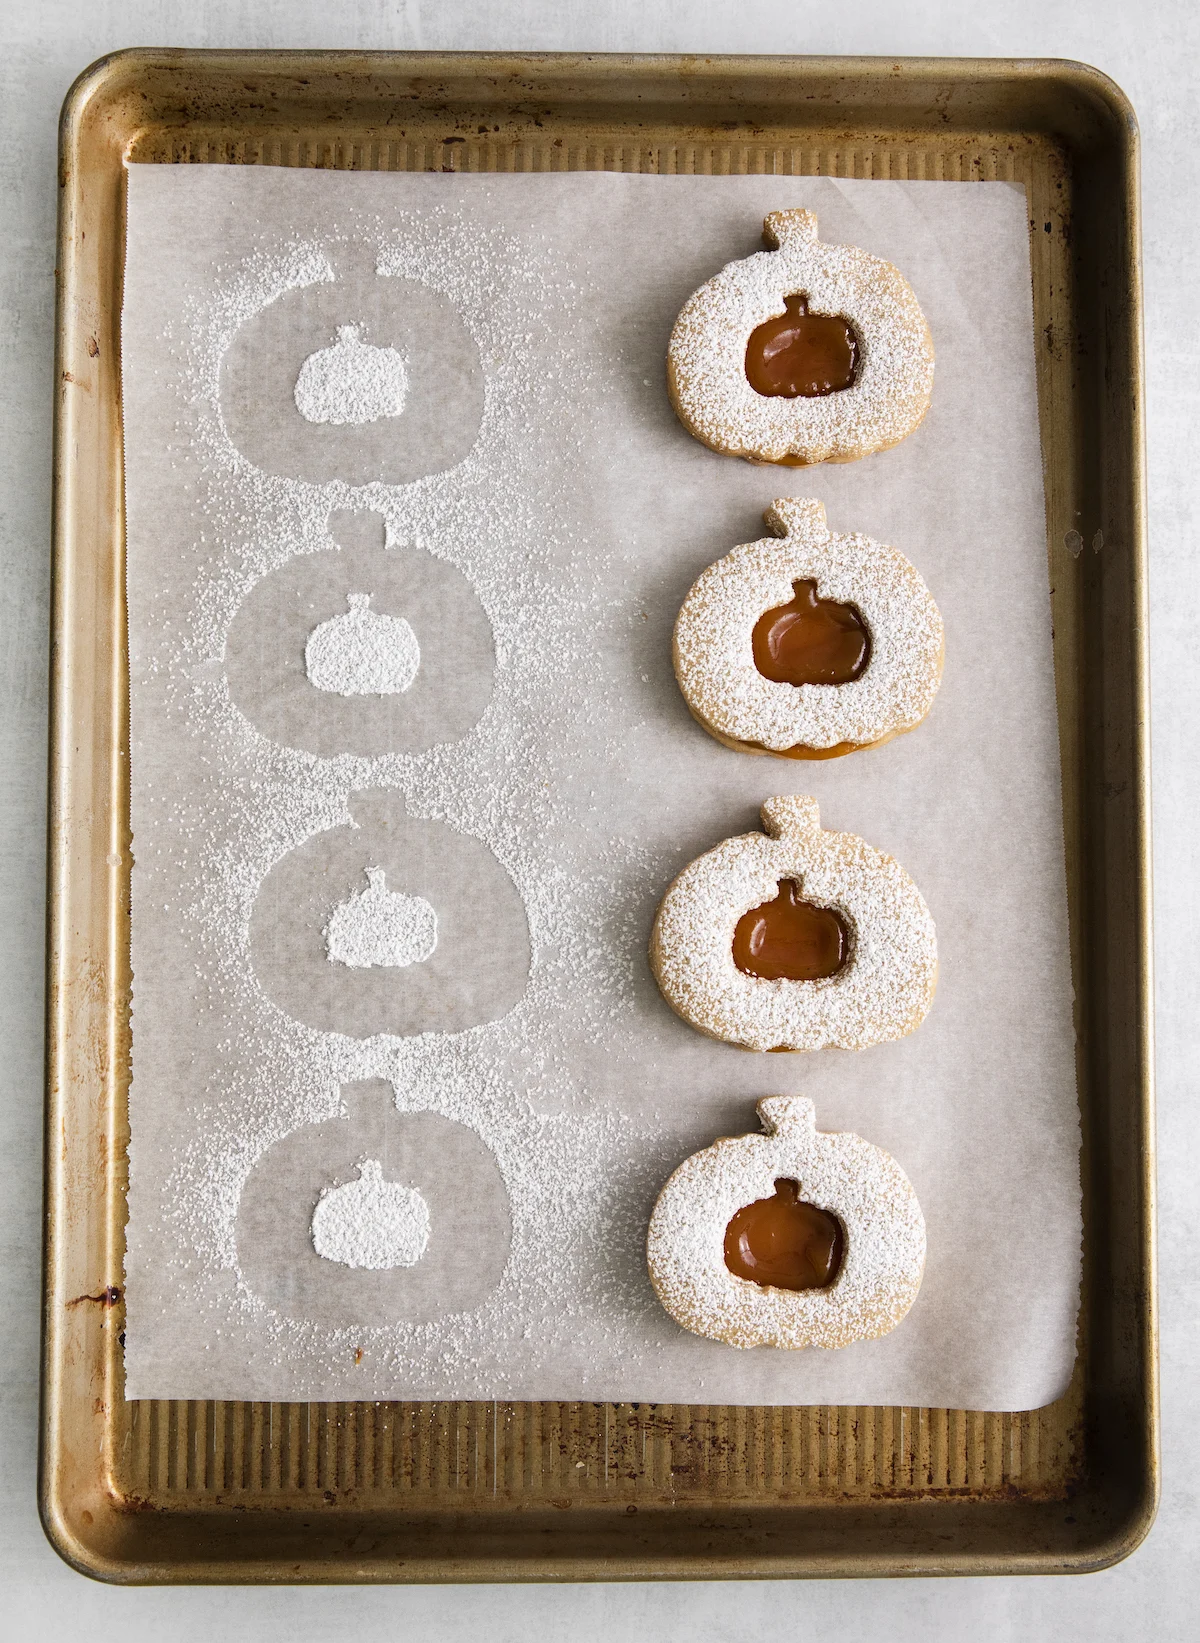 Tops placed onto the bottoms of the pumpkin shortbread cookies